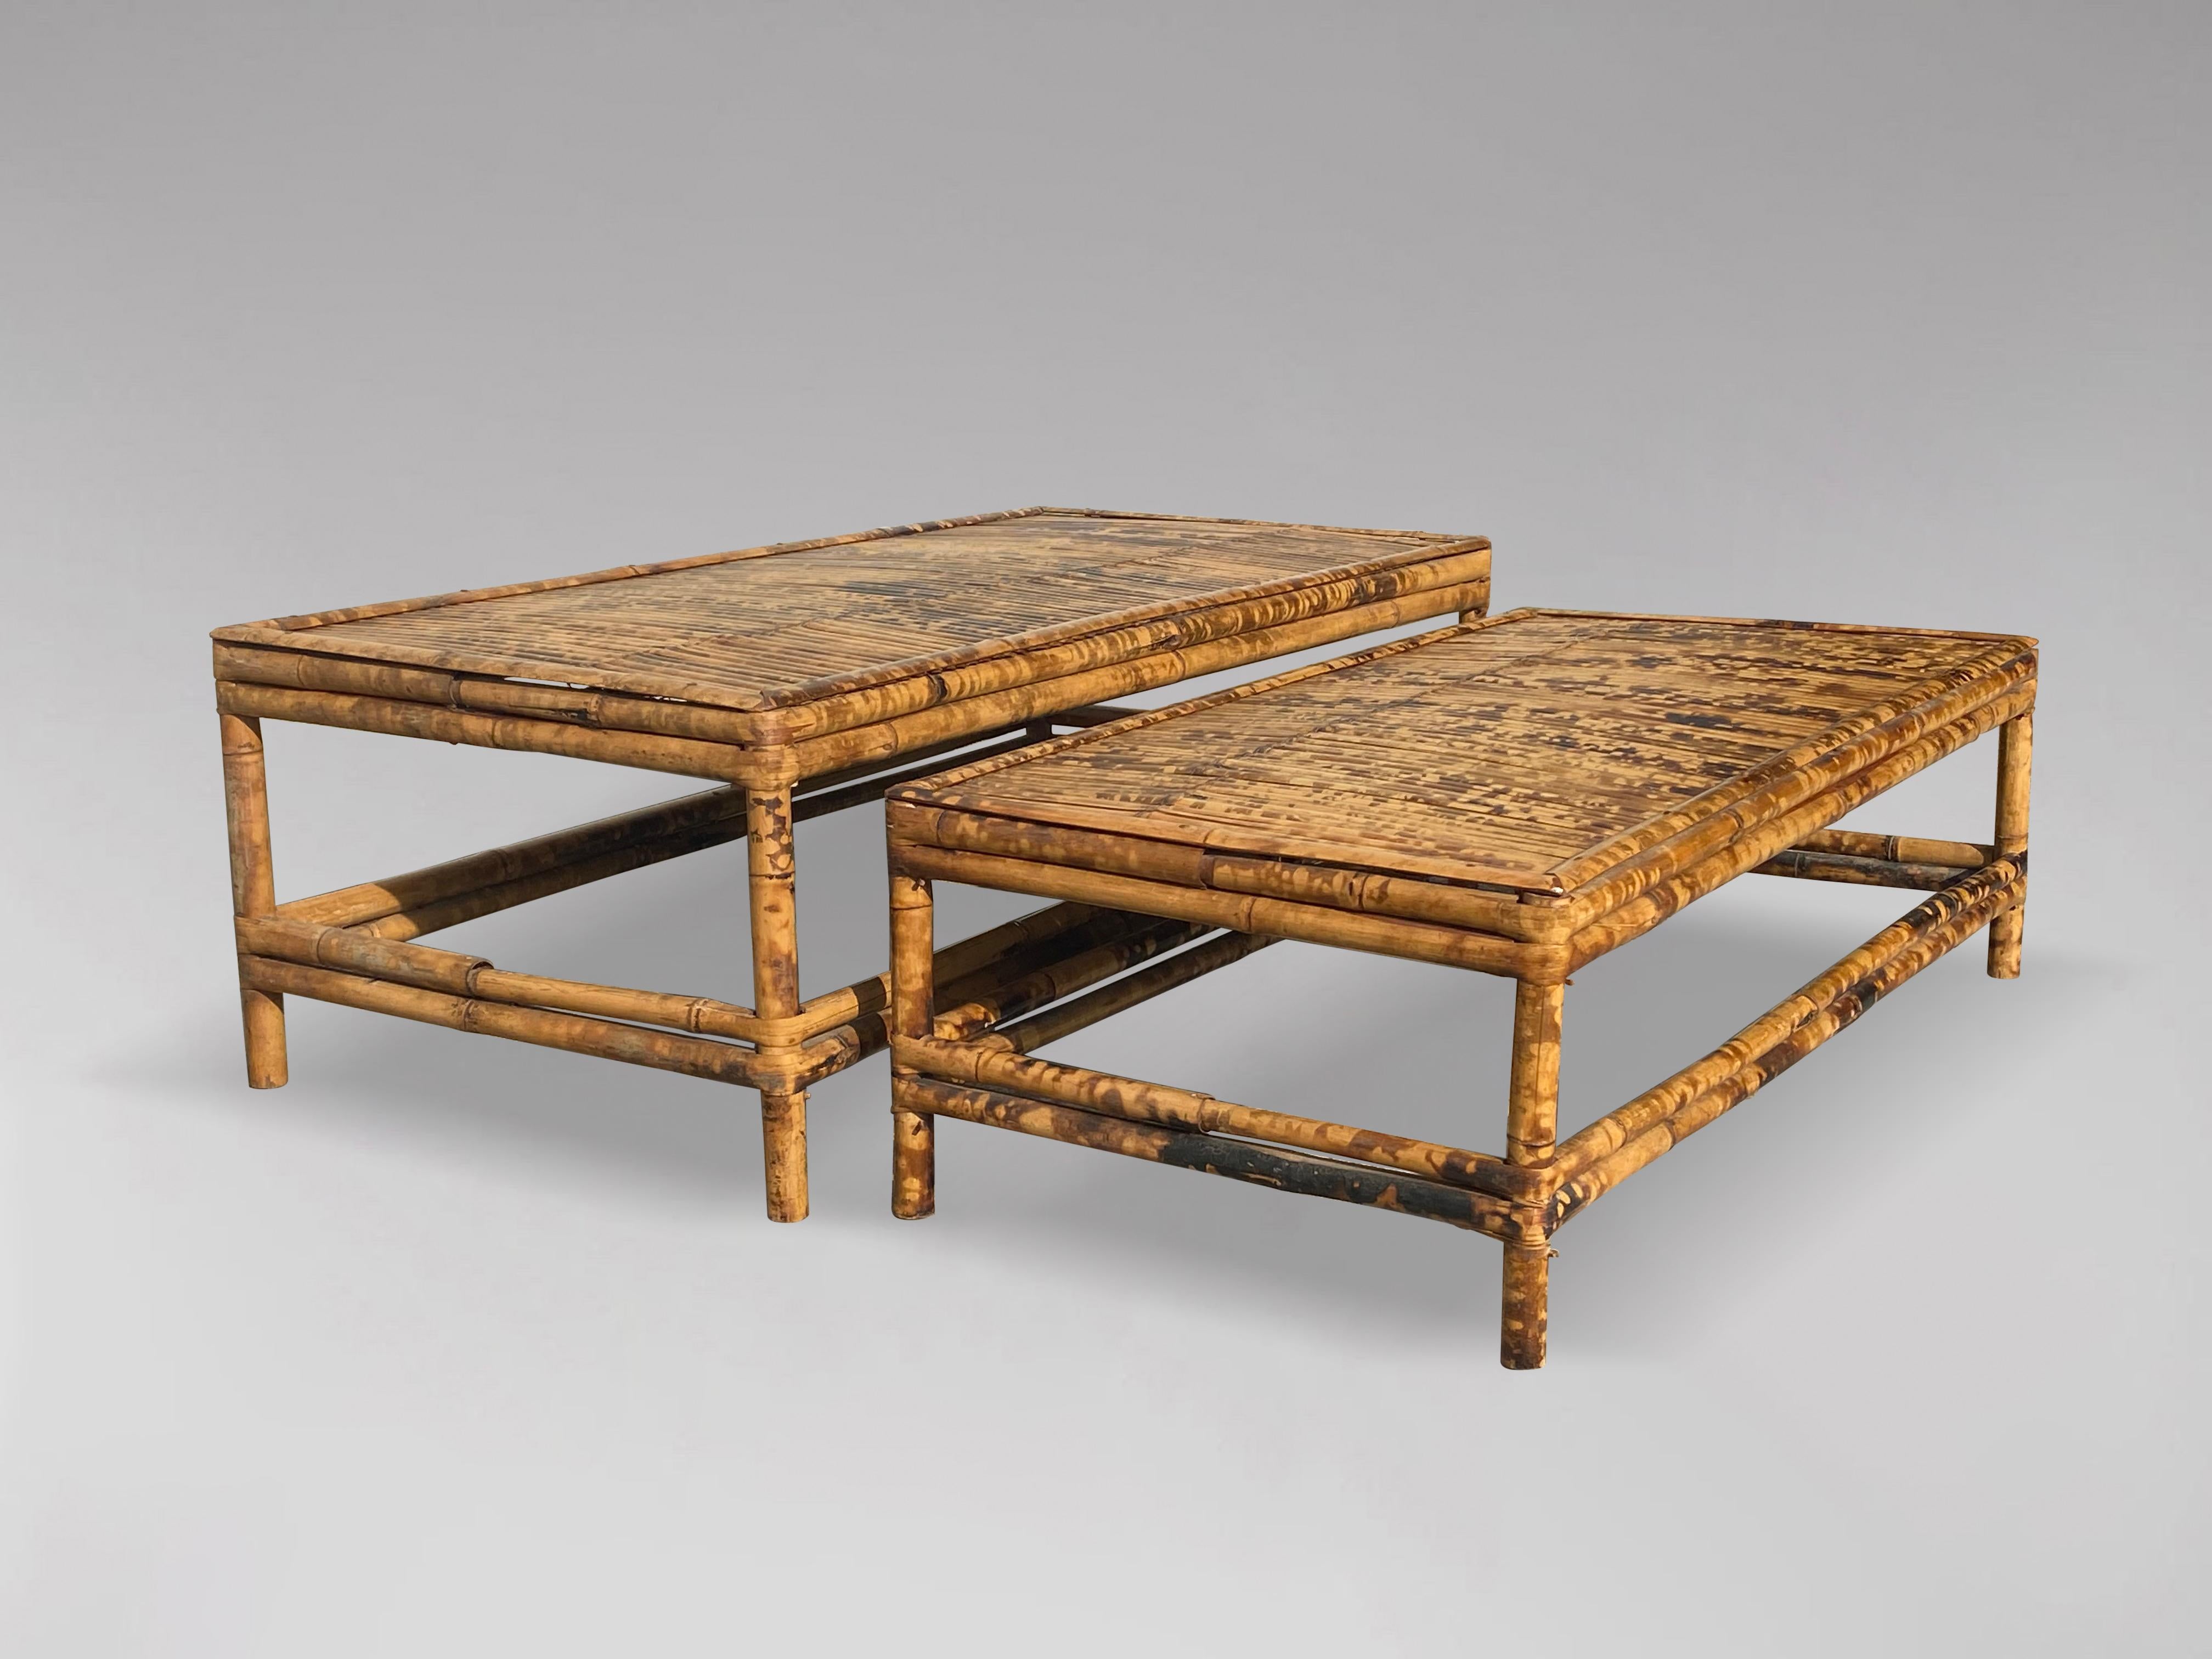 A set of two tortoise bamboo coffee tables from France, dating from the 1960s. The low rectangular bamboo coffee tables featuring a square slatted top sitting above four straight legs connected to one another through side stretchers. Great size and